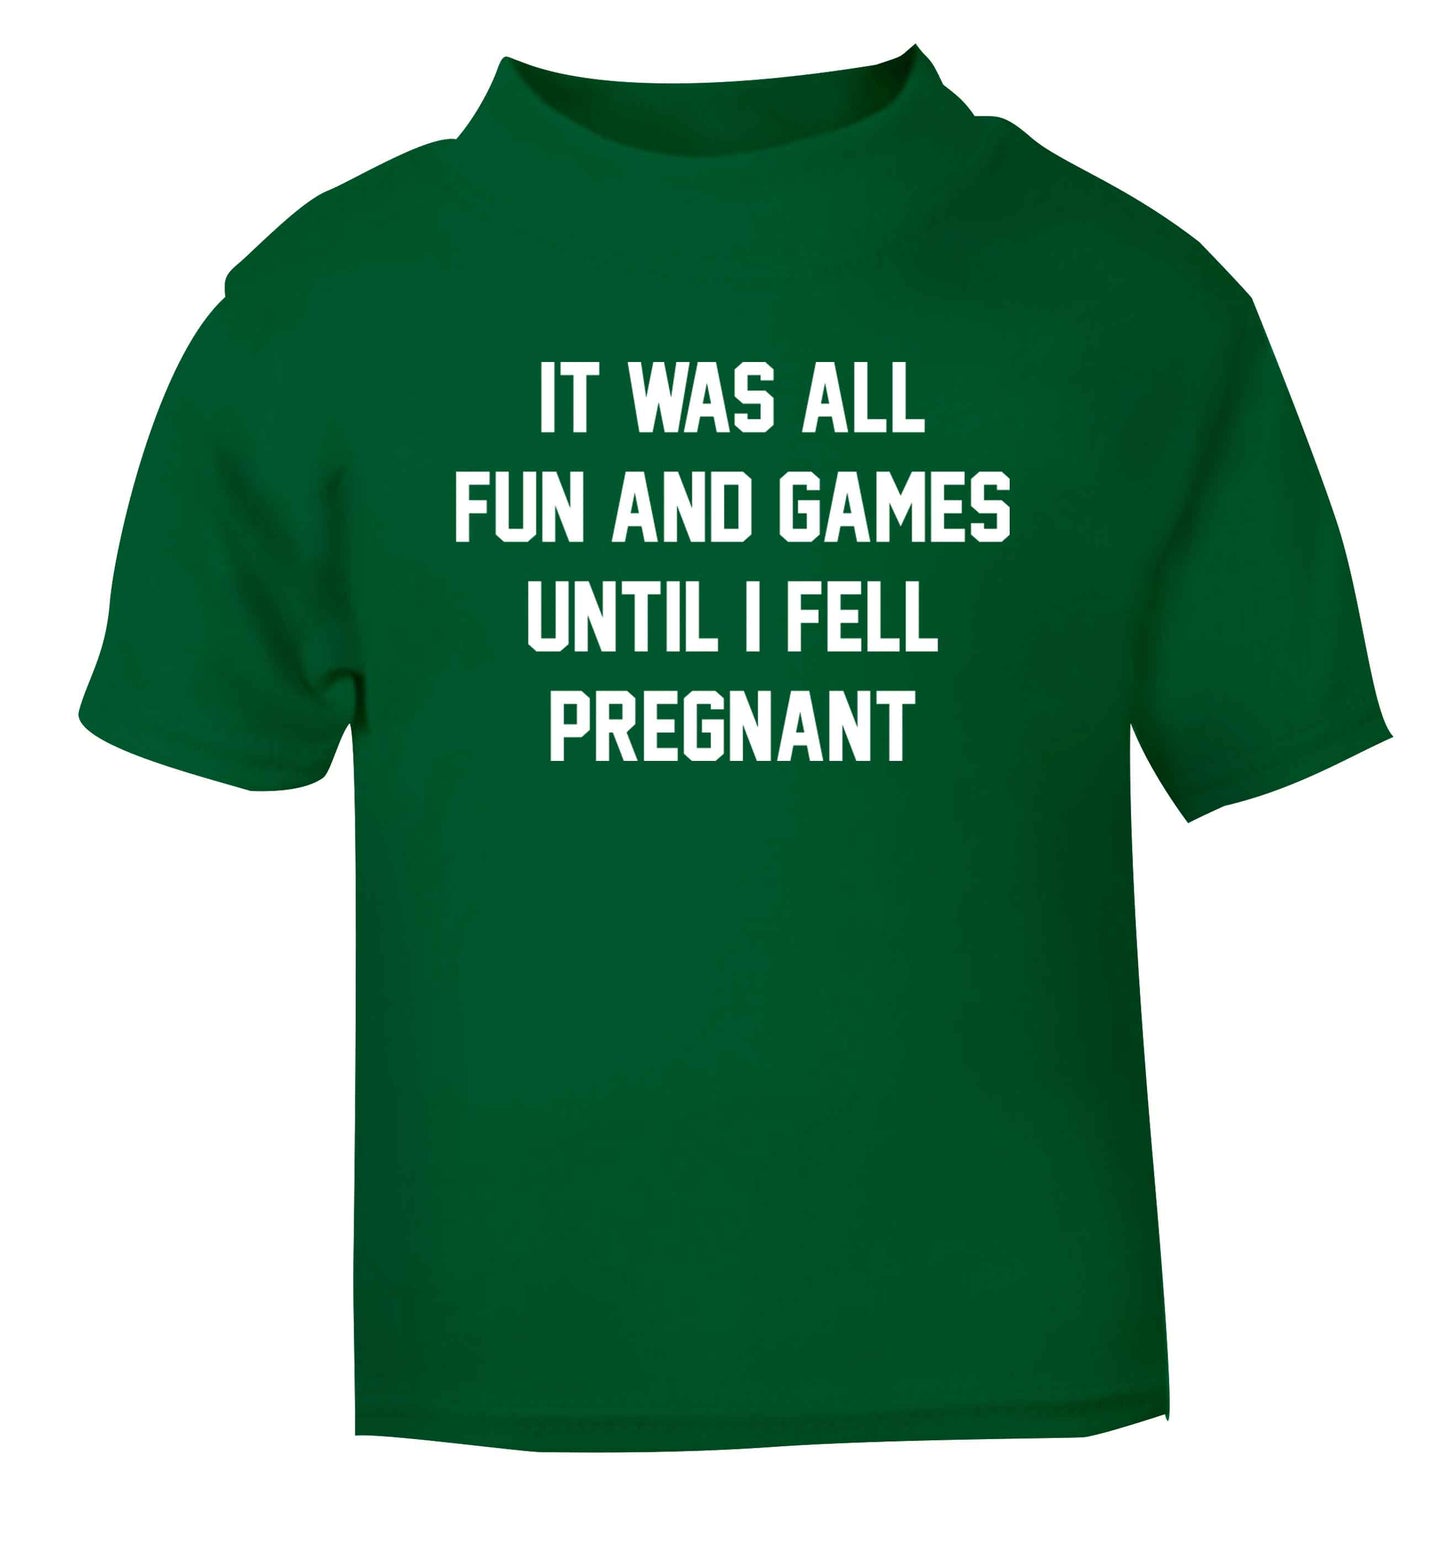 It was all fun and games until I fell pregnant kicks green Baby Toddler Tshirt 2 Years